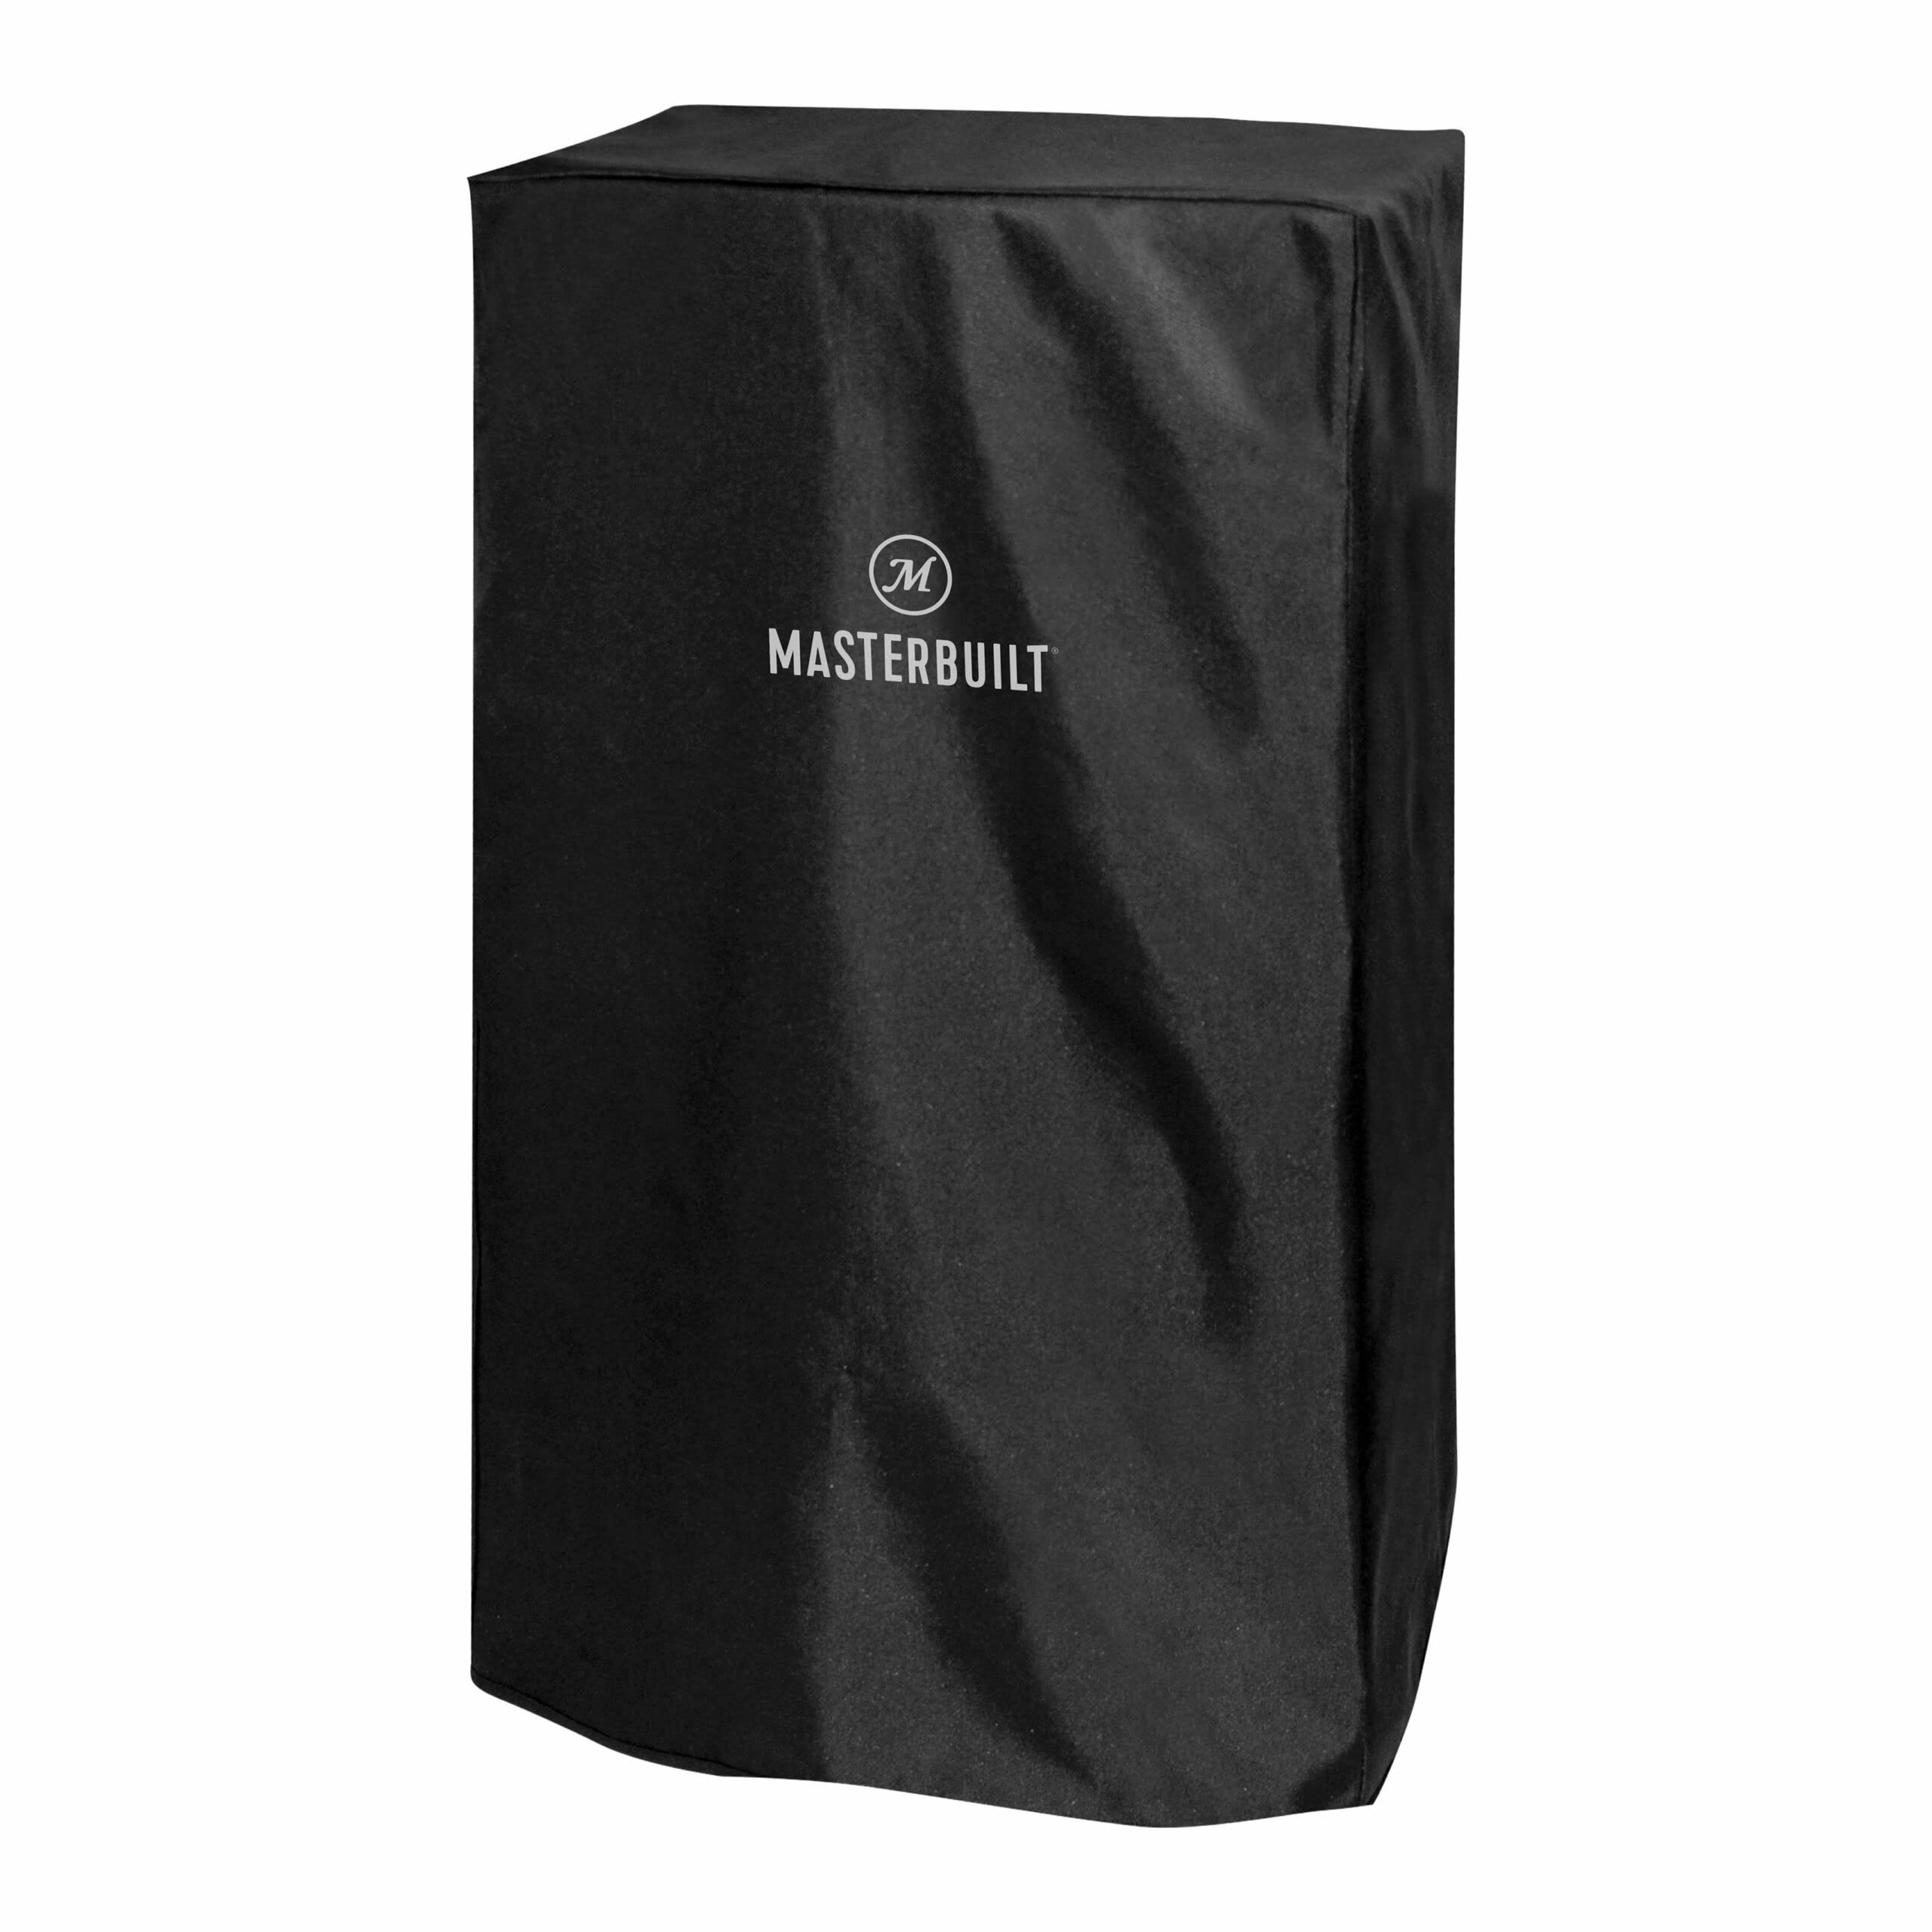 30" Masterbuilt Digital Electric Smoker Cover $9.77 + Free Shipping w/ Prime or on $35+